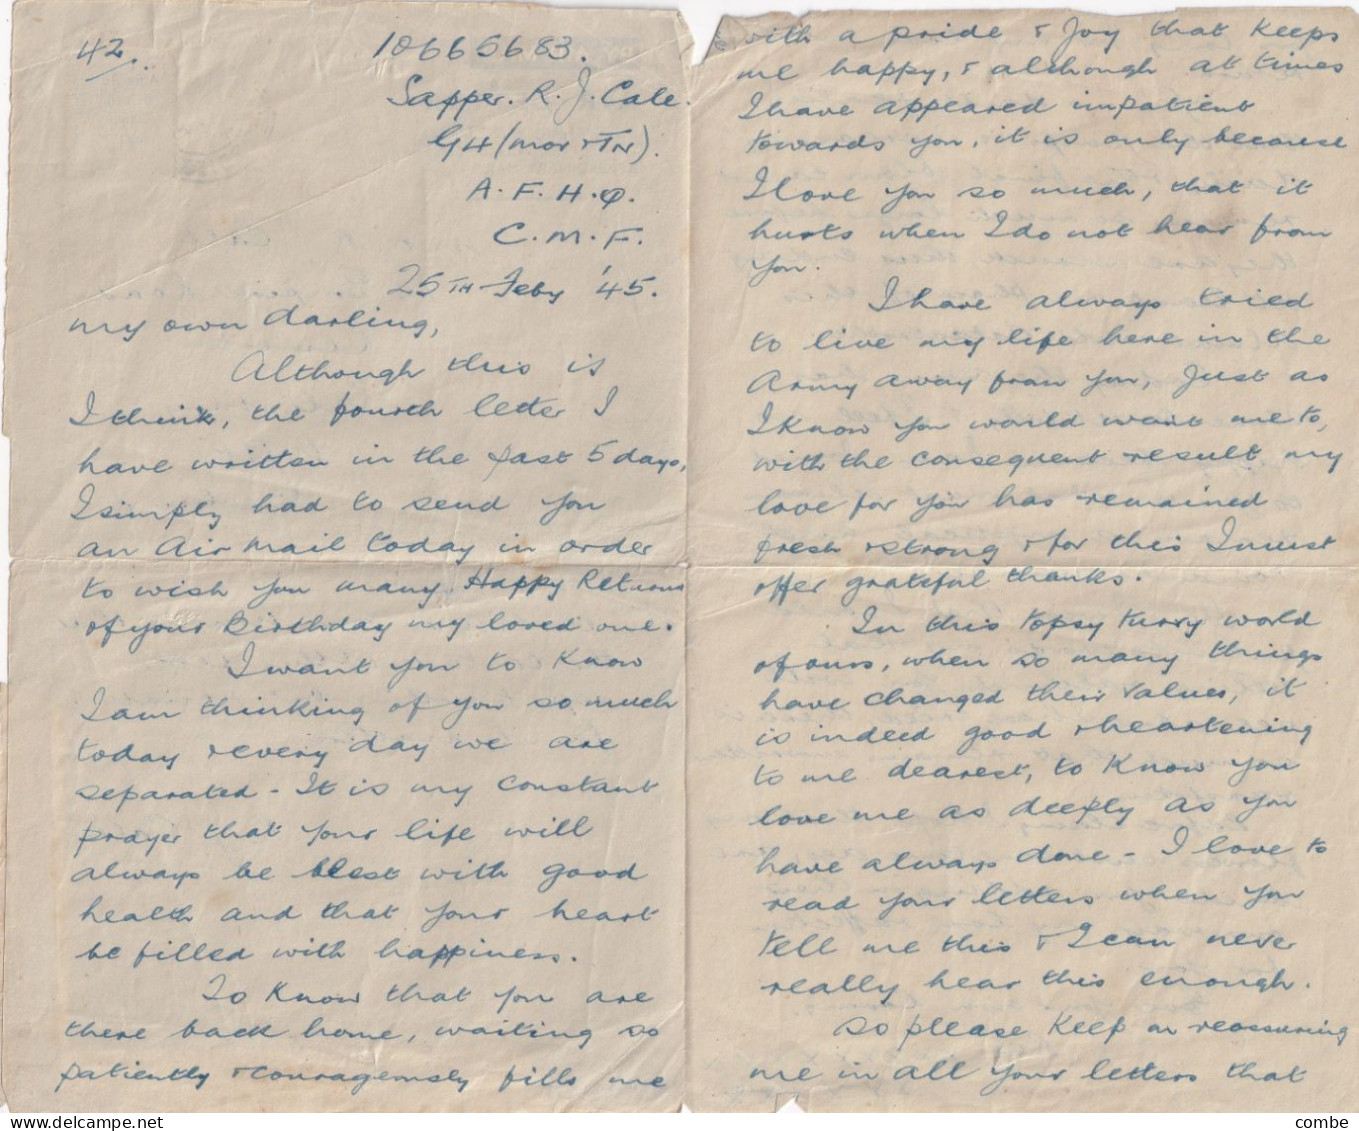 AIR LETTER. GB. FIELD POST OFFICE 751. 25 FEB 45. CASERTA. ITALY. CENSORED - Militaria